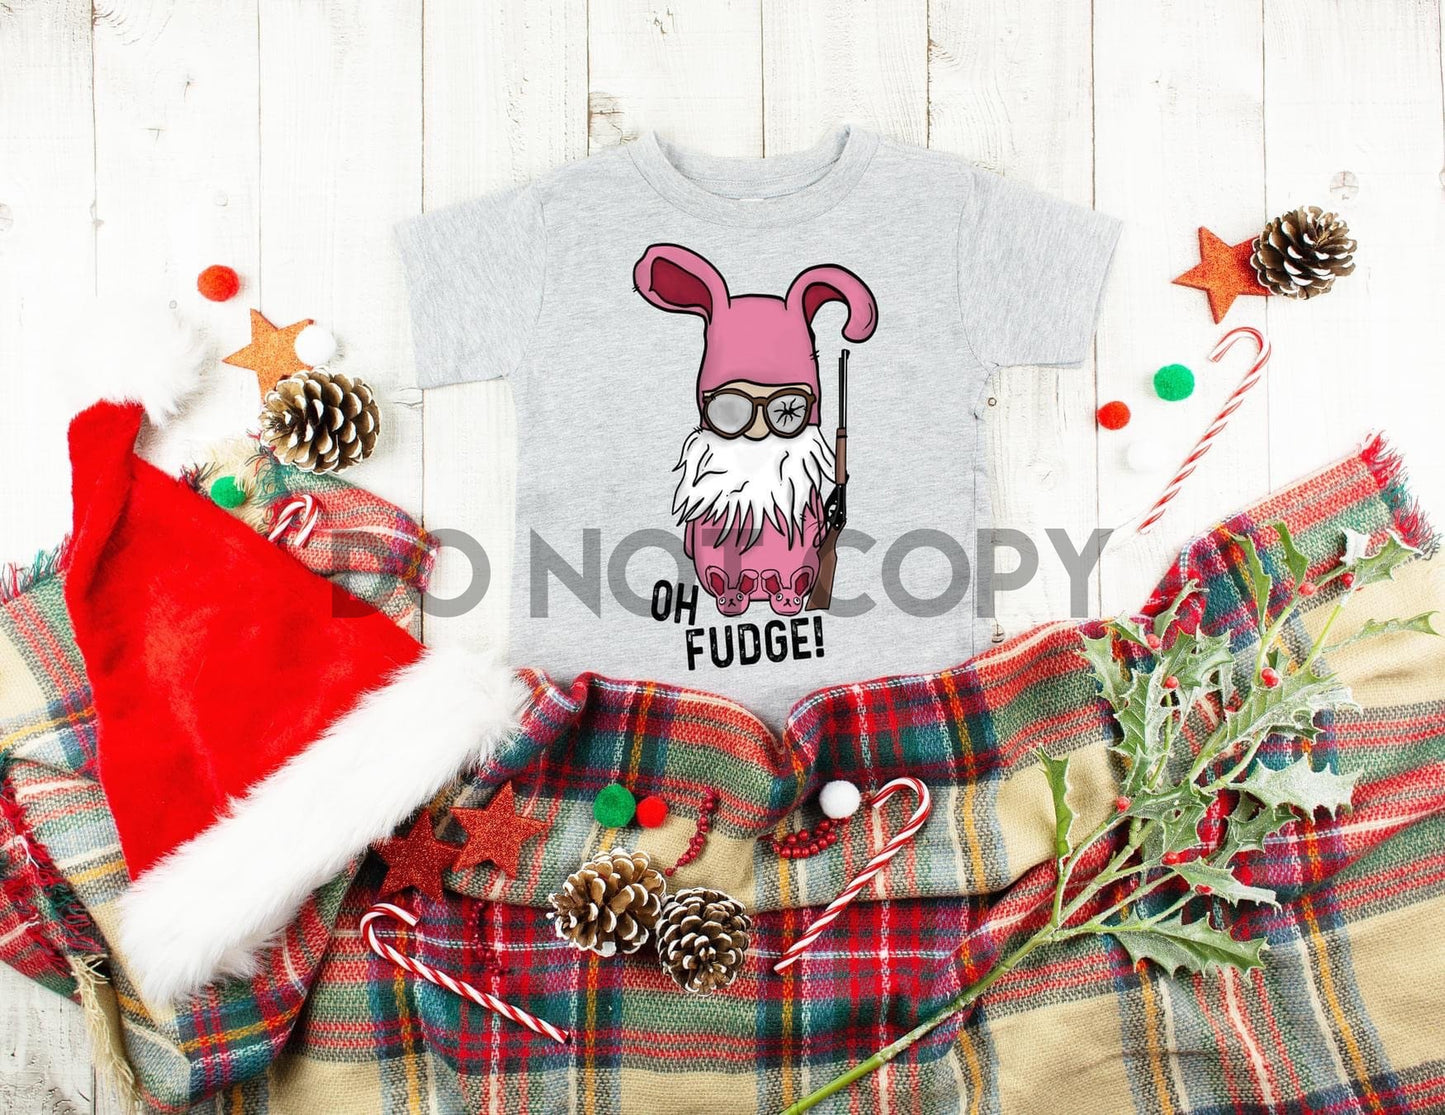 Oh Fudge Shoot your eye our bunny pajama Ralphie Christmas Story YOUTH HIGH HEAT Full color Screen Print transfer